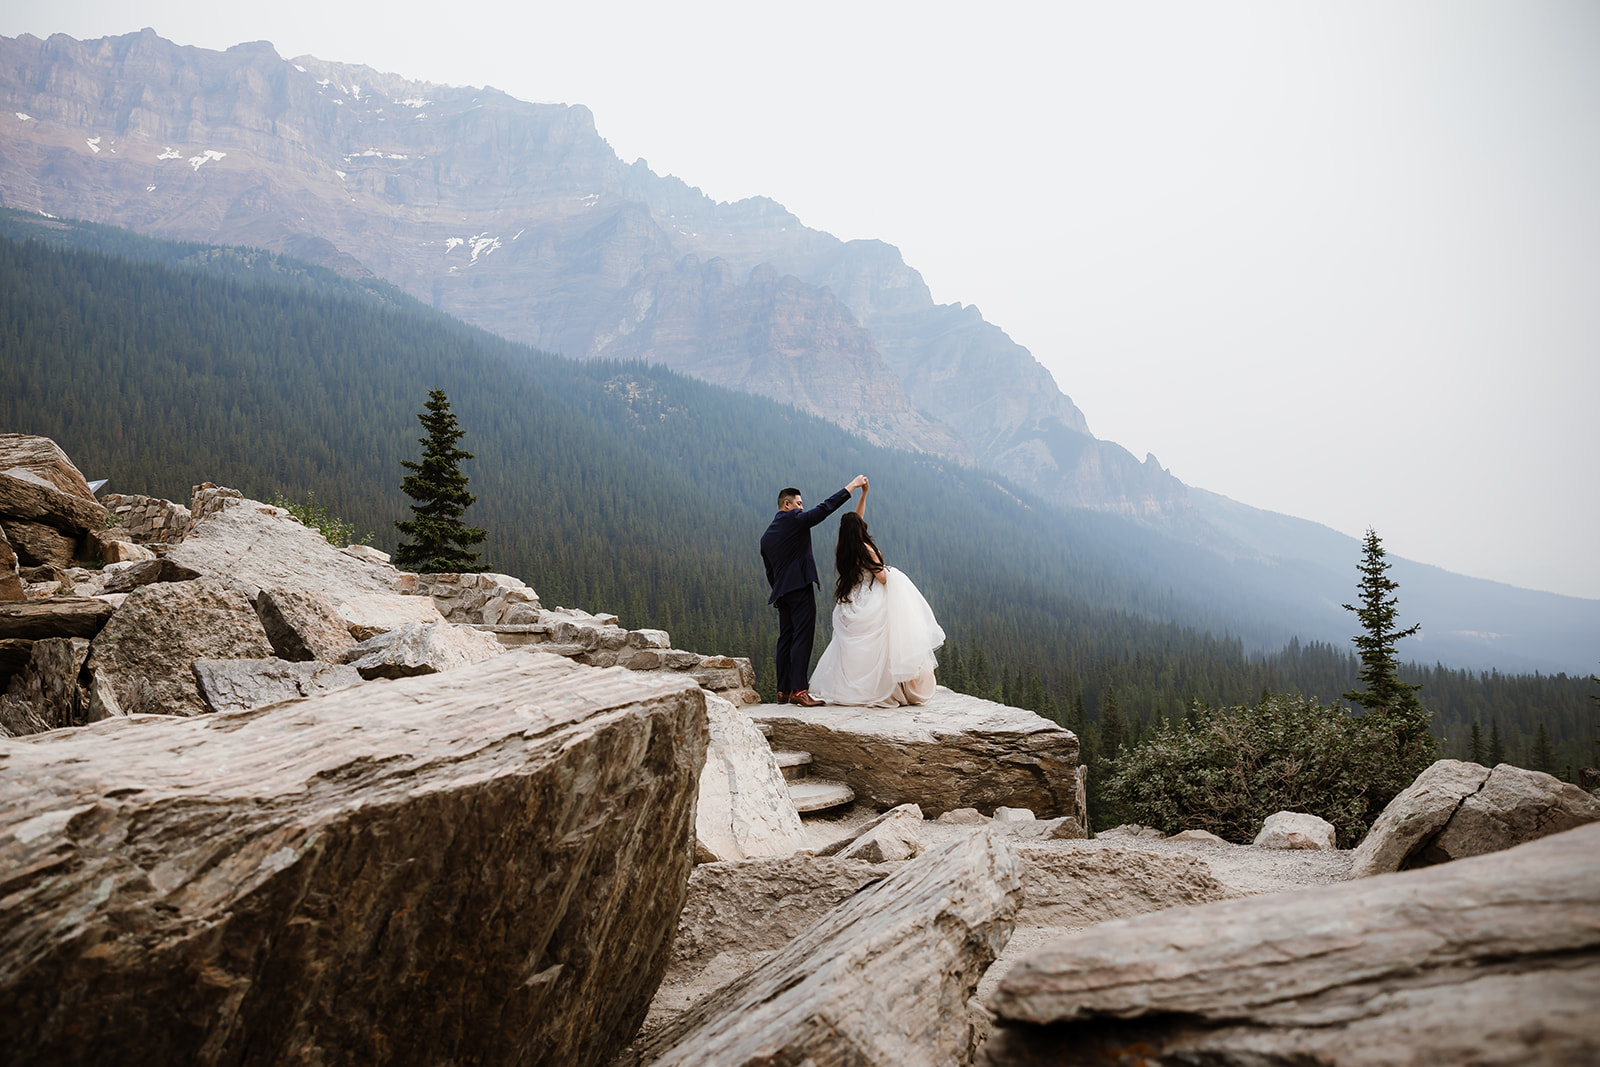 How To Get Married in Banff National Park